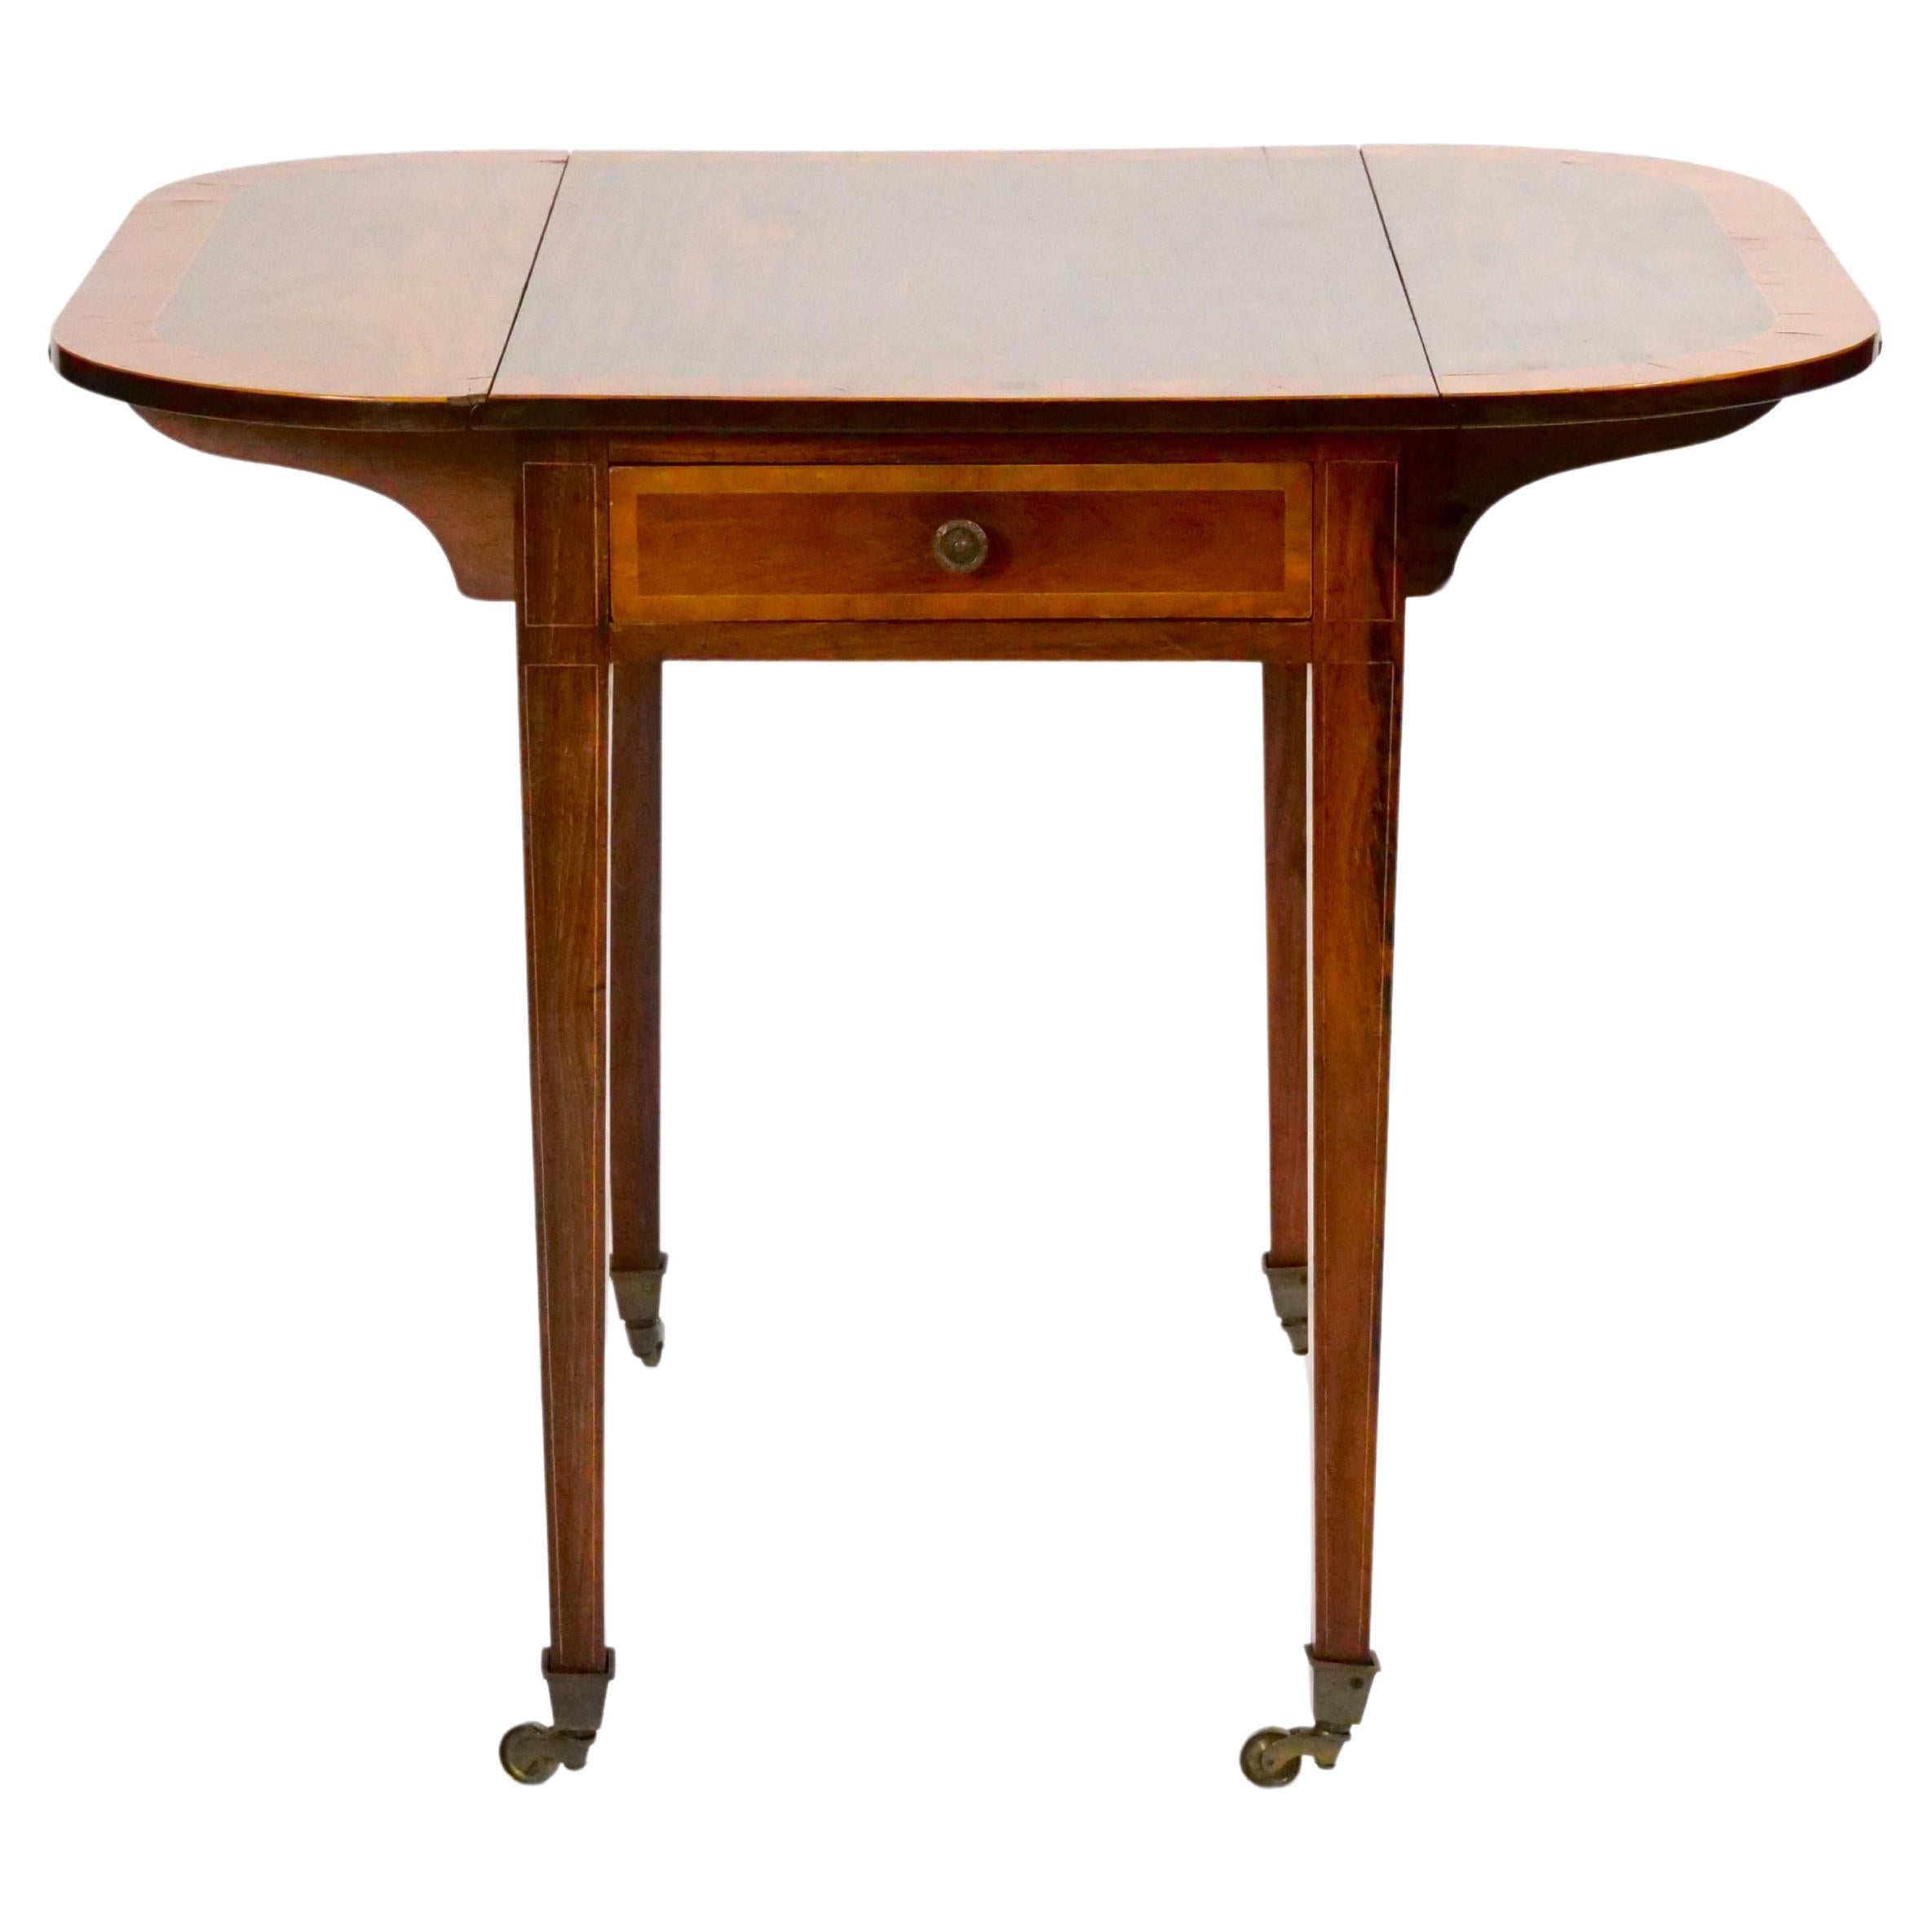 English Burl Mahogany Two Folding Leaves Extension Table For Sale